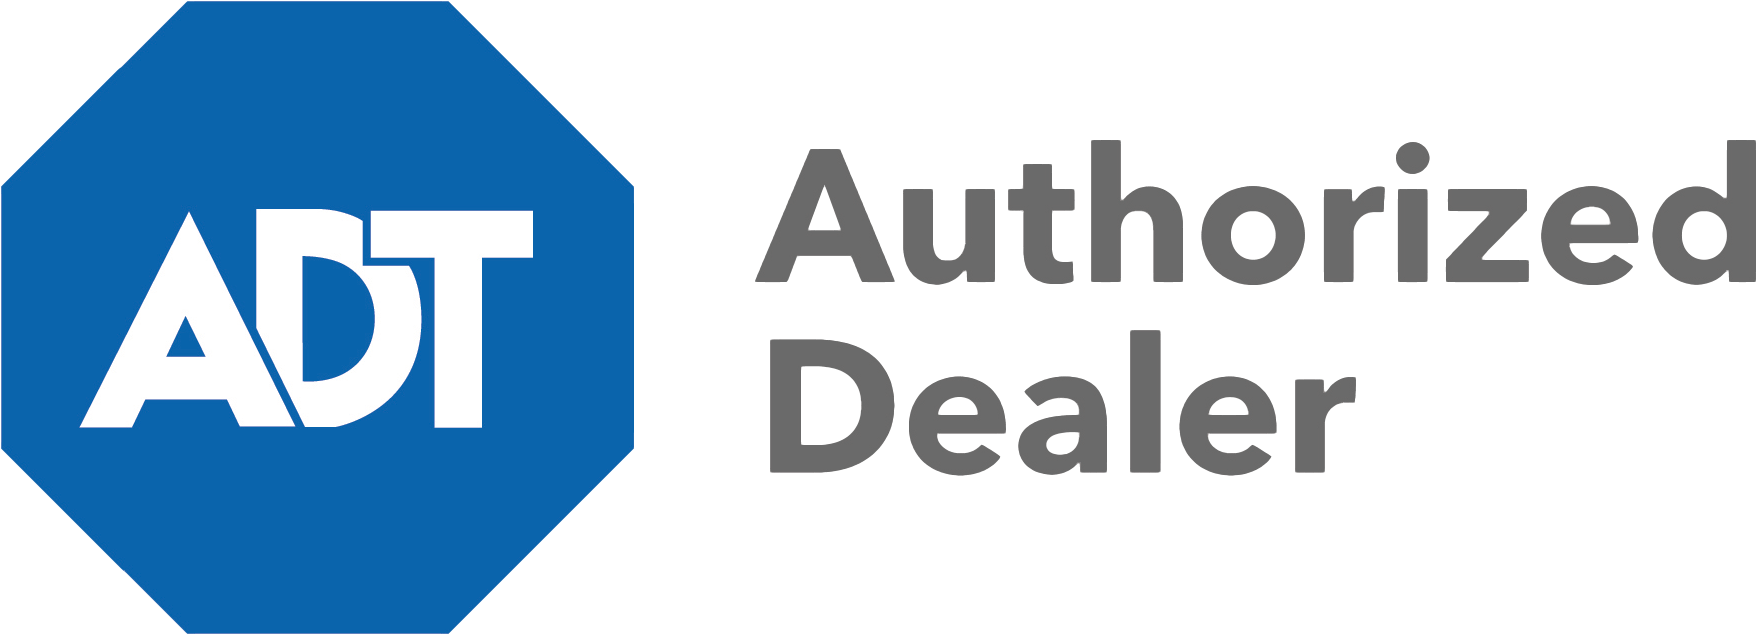 Home Security - Adt Authorized Dealer Logo (2116x753)